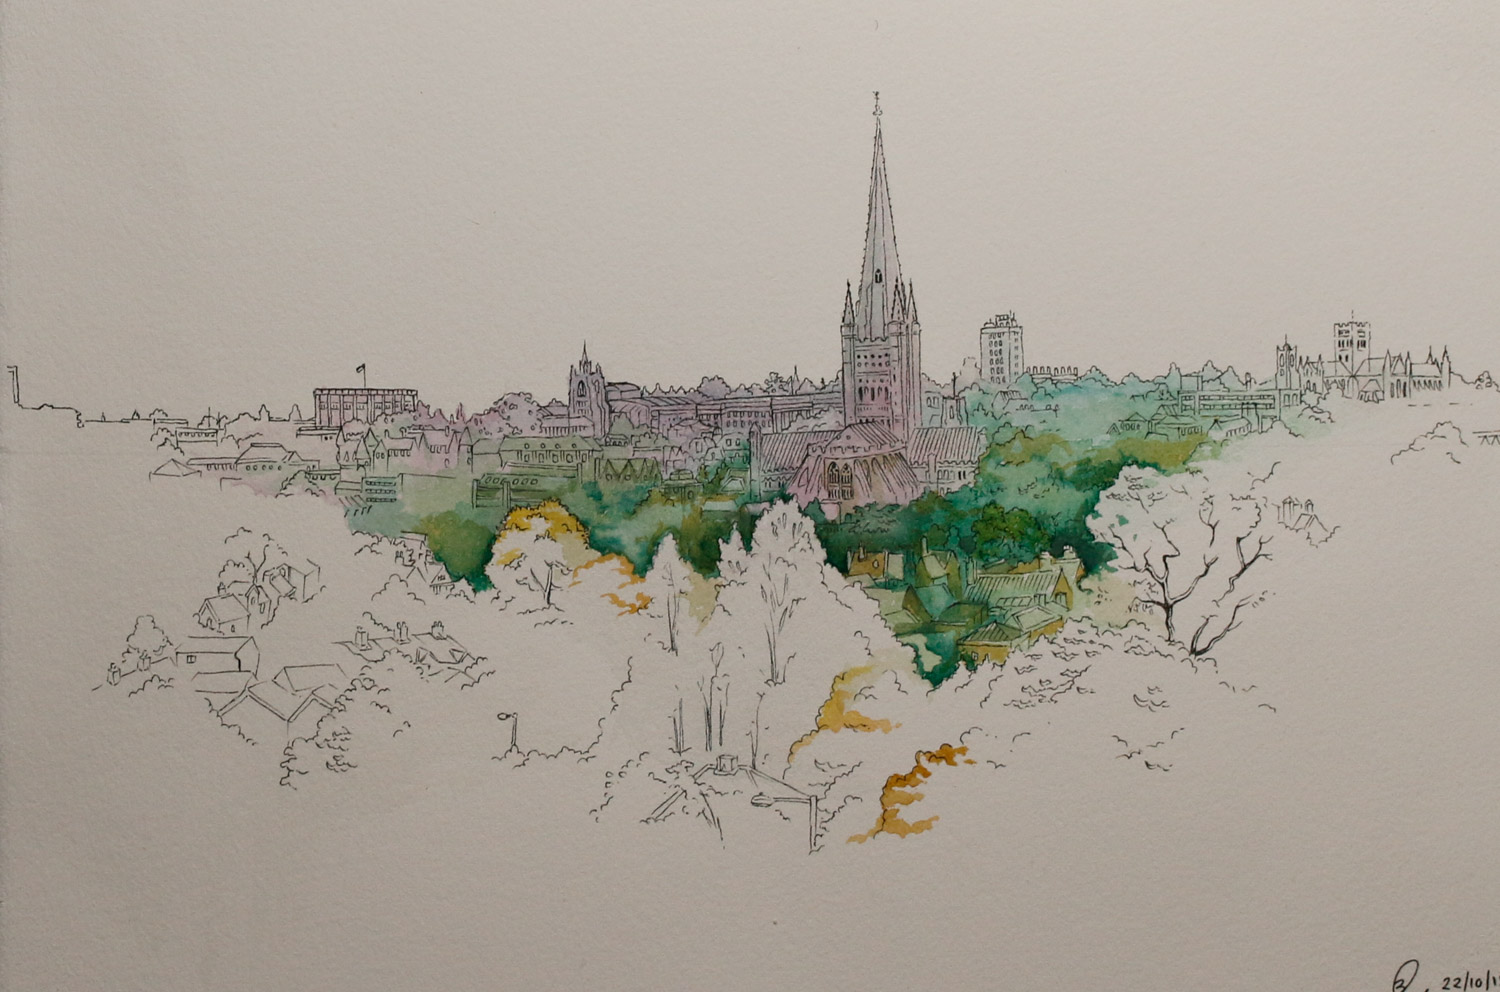 Artist Beverley Coraldean - Norwich Landmarks from Mousehold, £250 7x11 Watercolour & Ink on Paper at Paint Out Norwich 2015